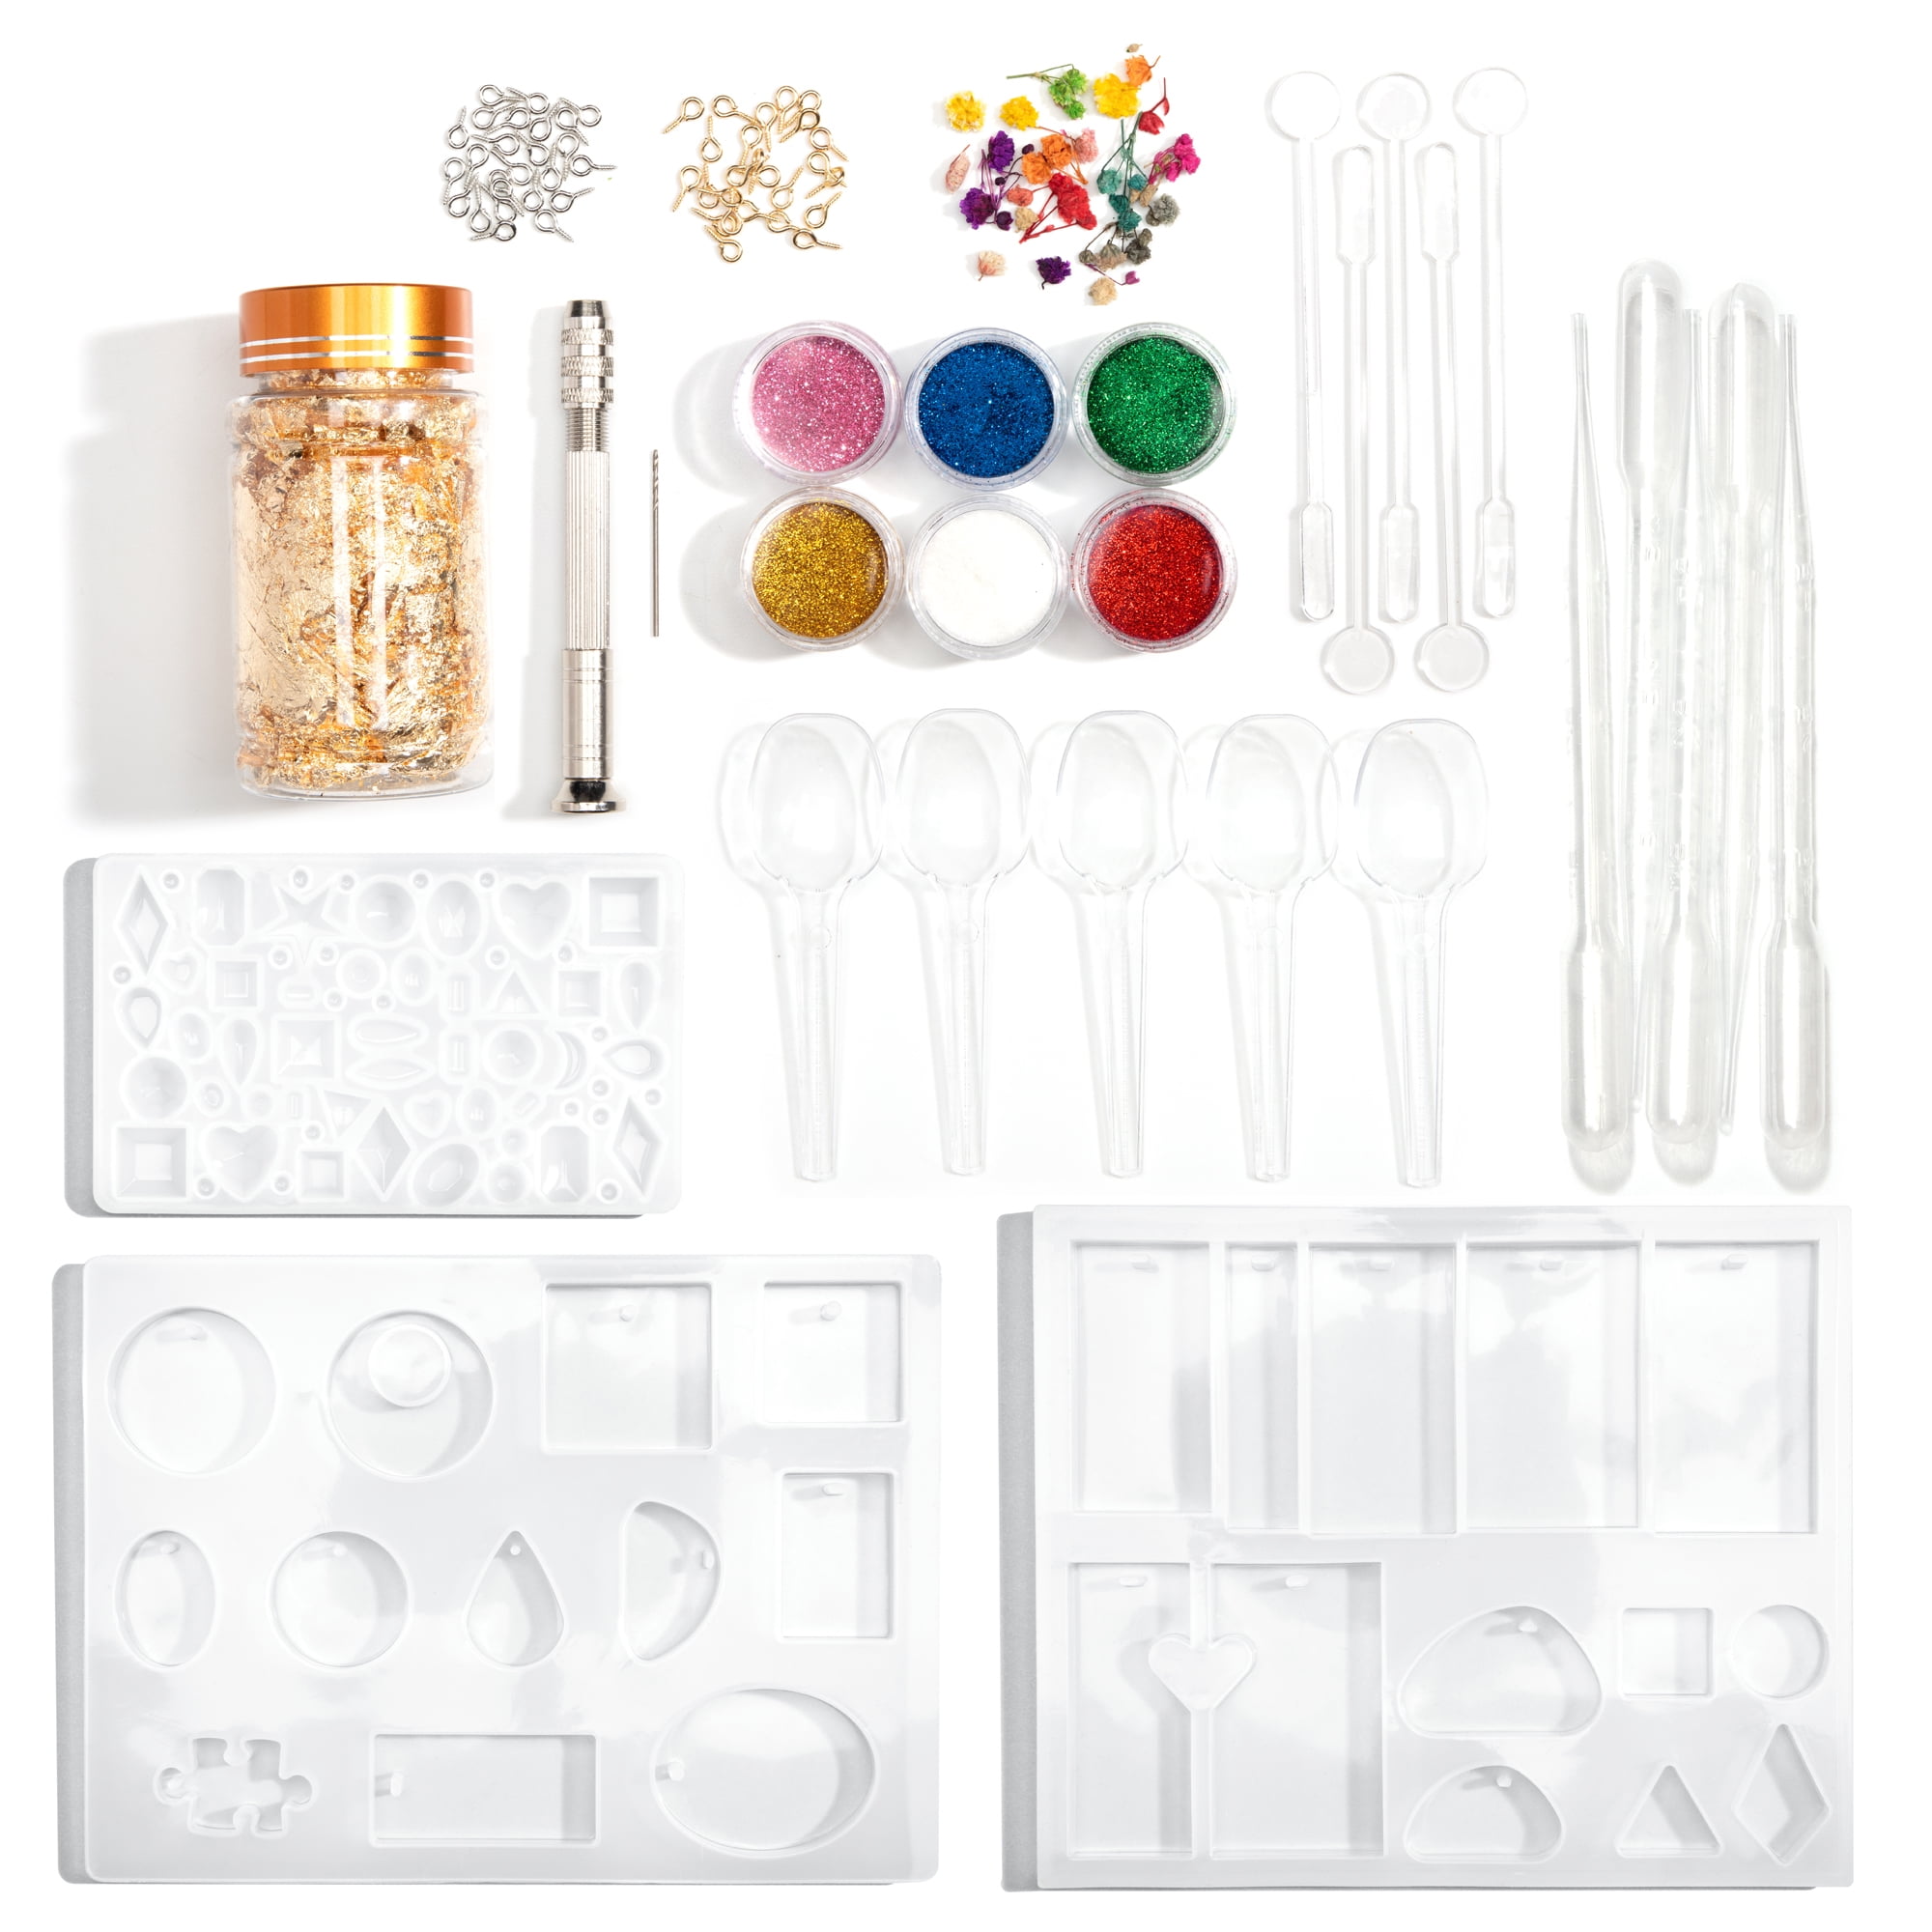 DIY Resin Earring Jewelry Making Kit - Silicone Molds, Findings and More!